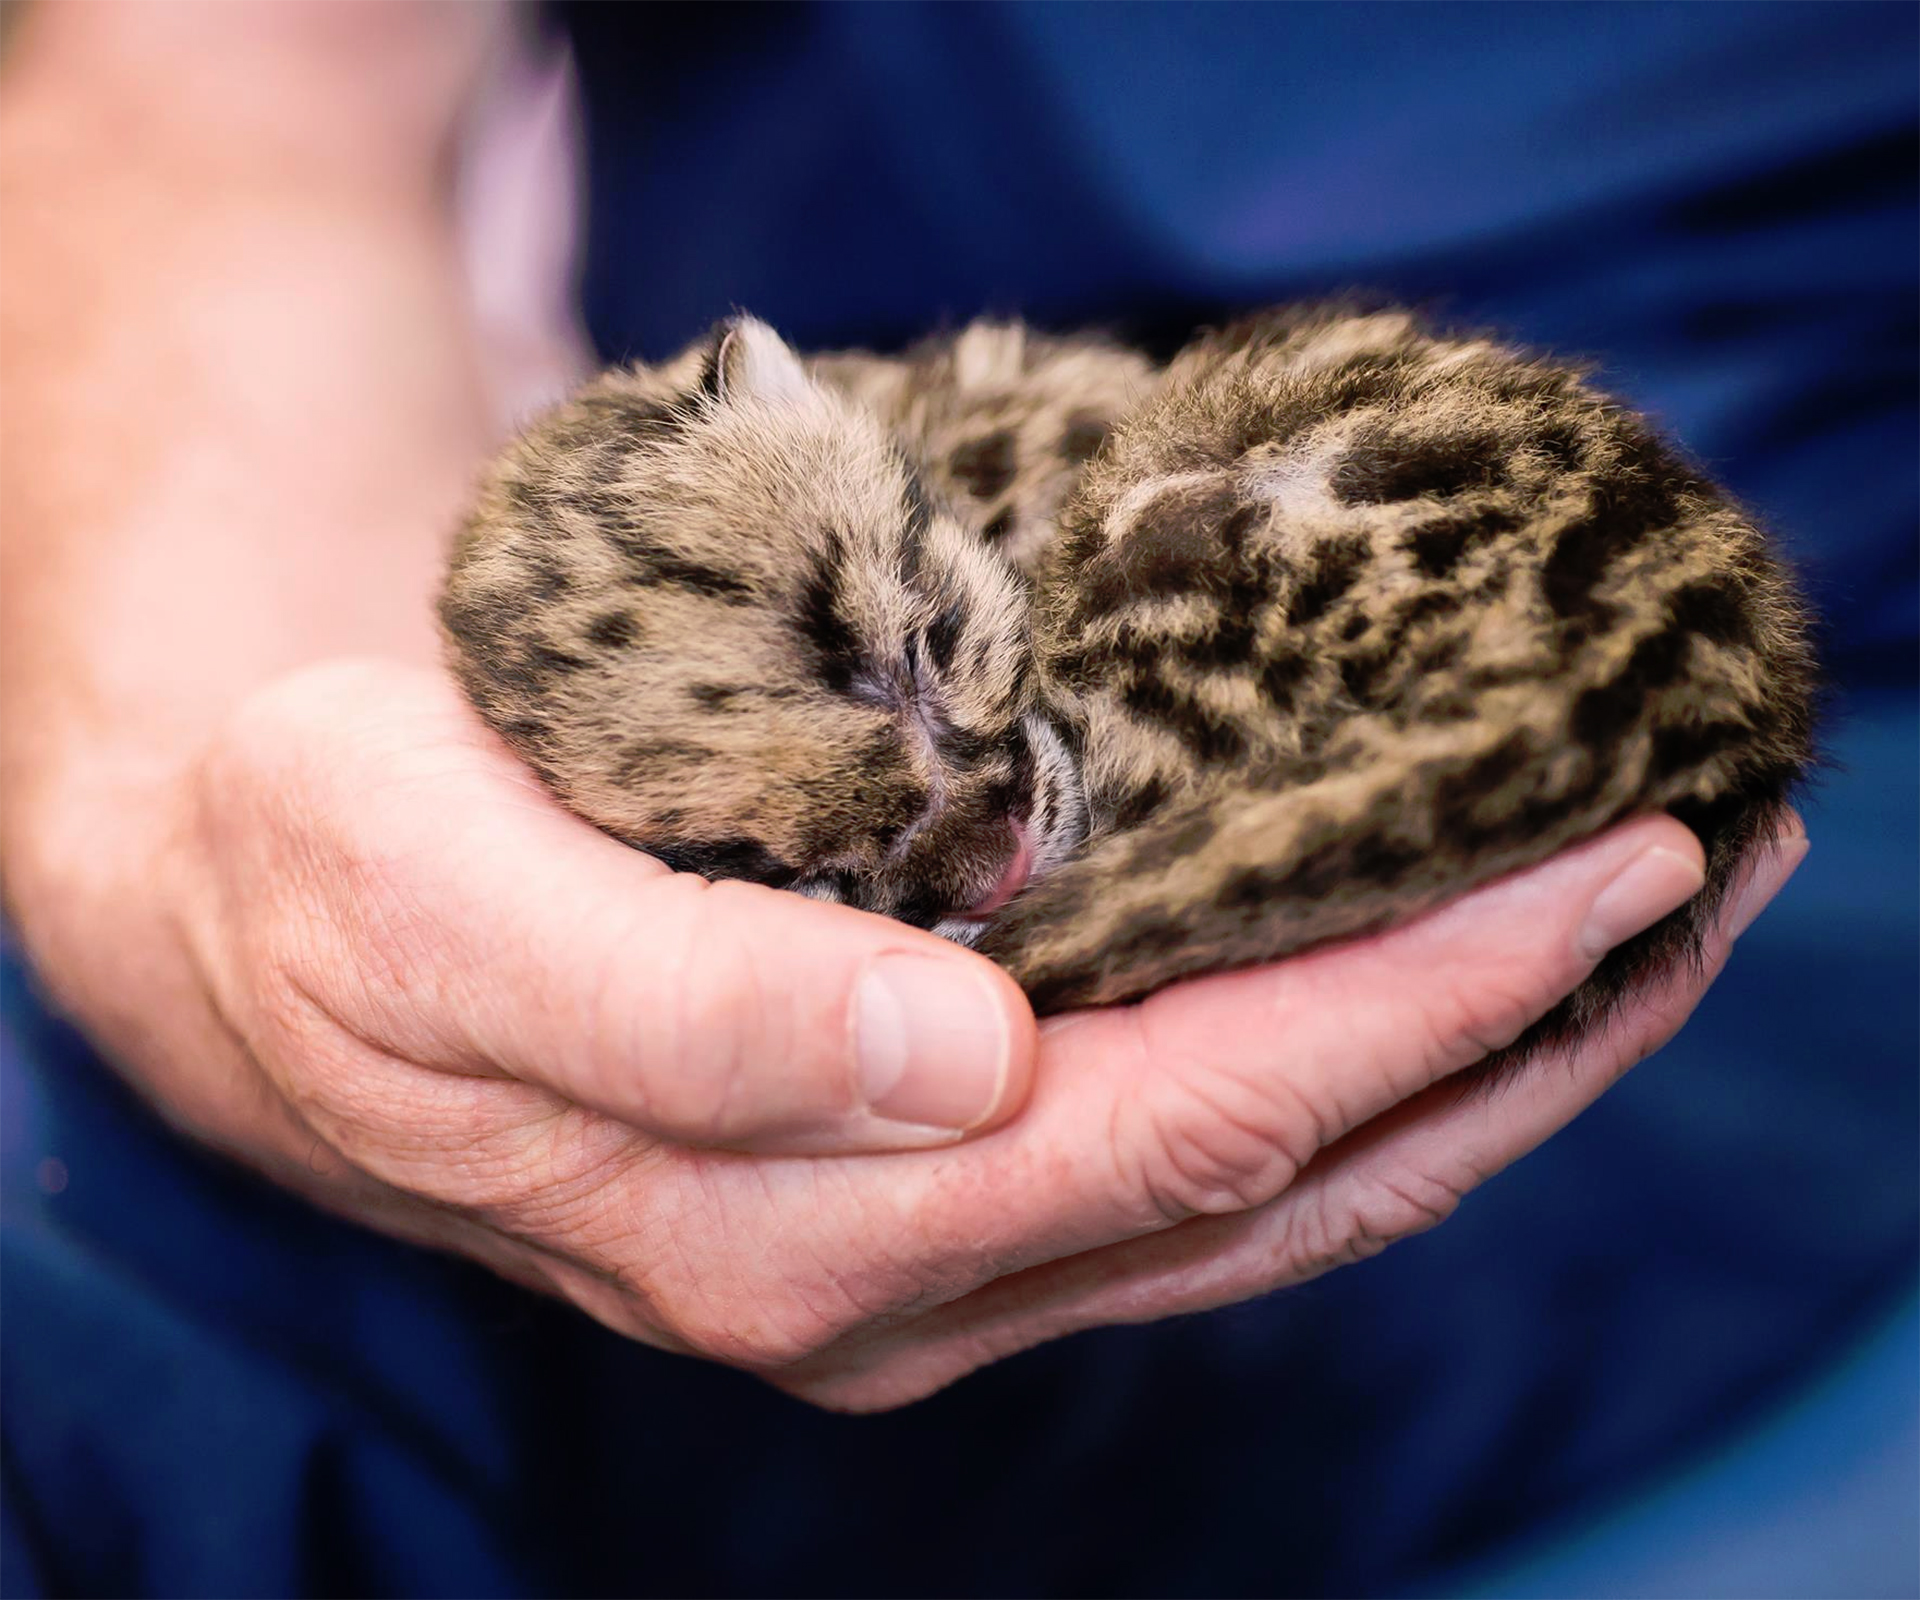 These tiny baby leopard cubs are breaking the internet